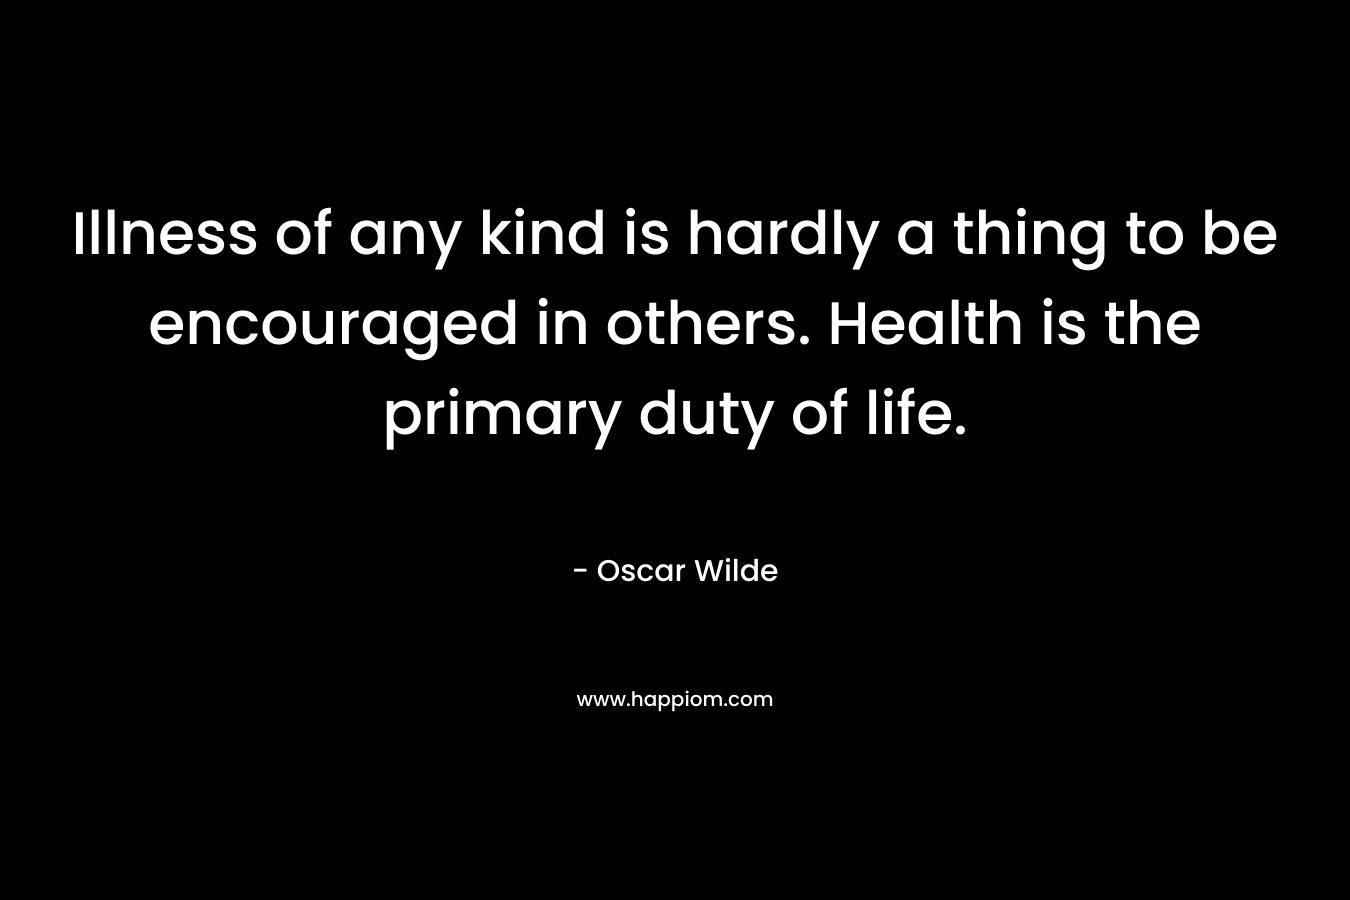 Illness of any kind is hardly a thing to be encouraged in others. Health is the primary duty of life. – Oscar Wilde